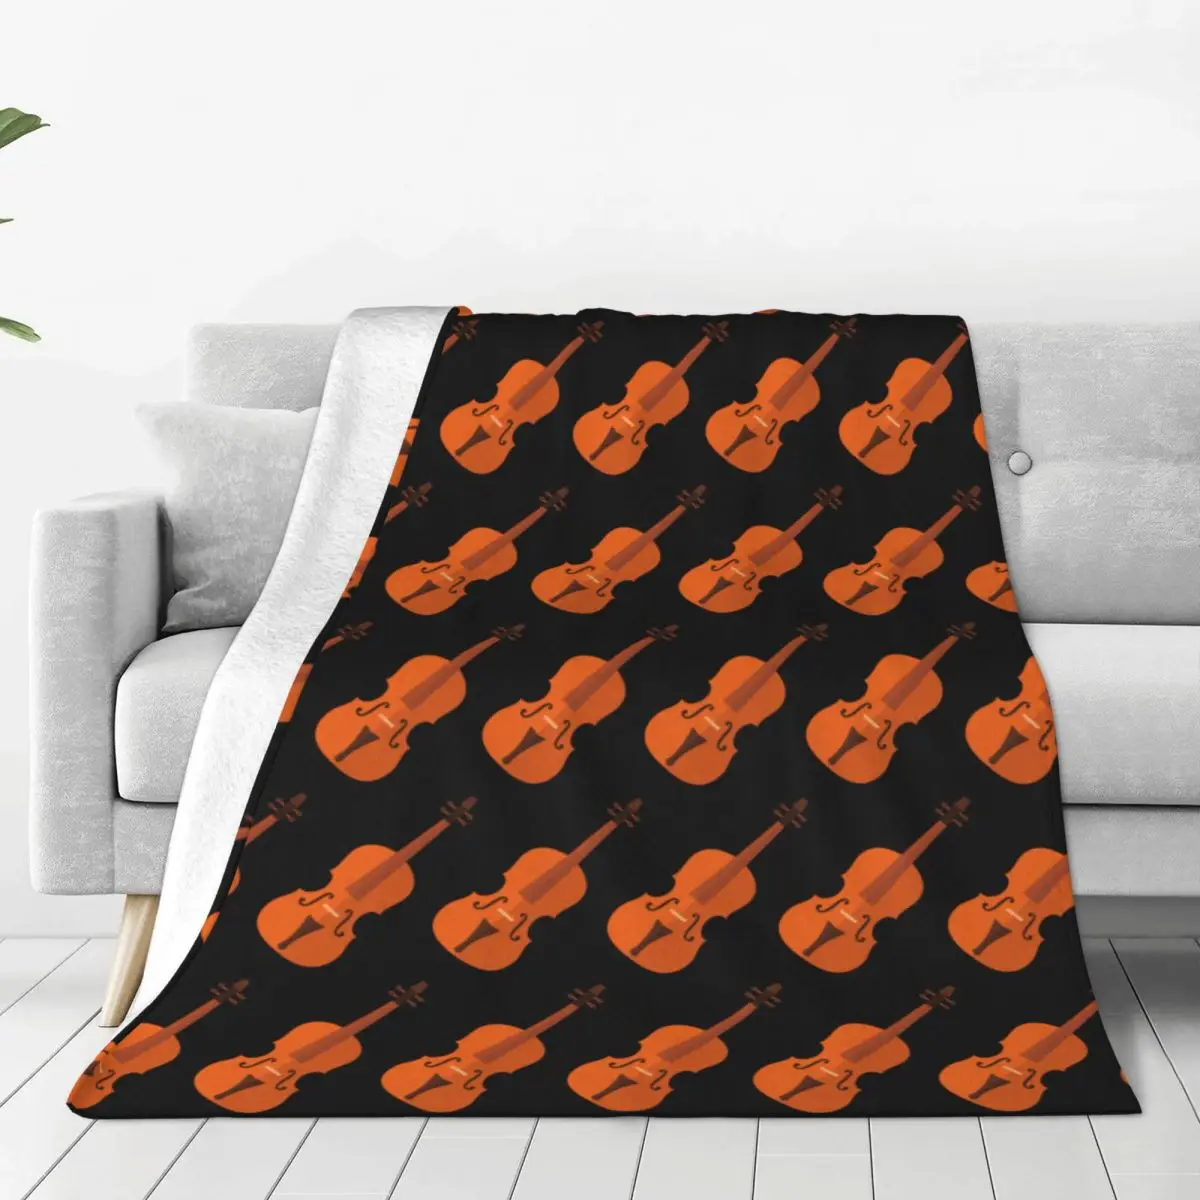 

Violin Soft Fleece Throw Blanket Warm and Cozy for All Seasons Comfy Microfiber Blanket for Couch Sofa Bed 40"x30"